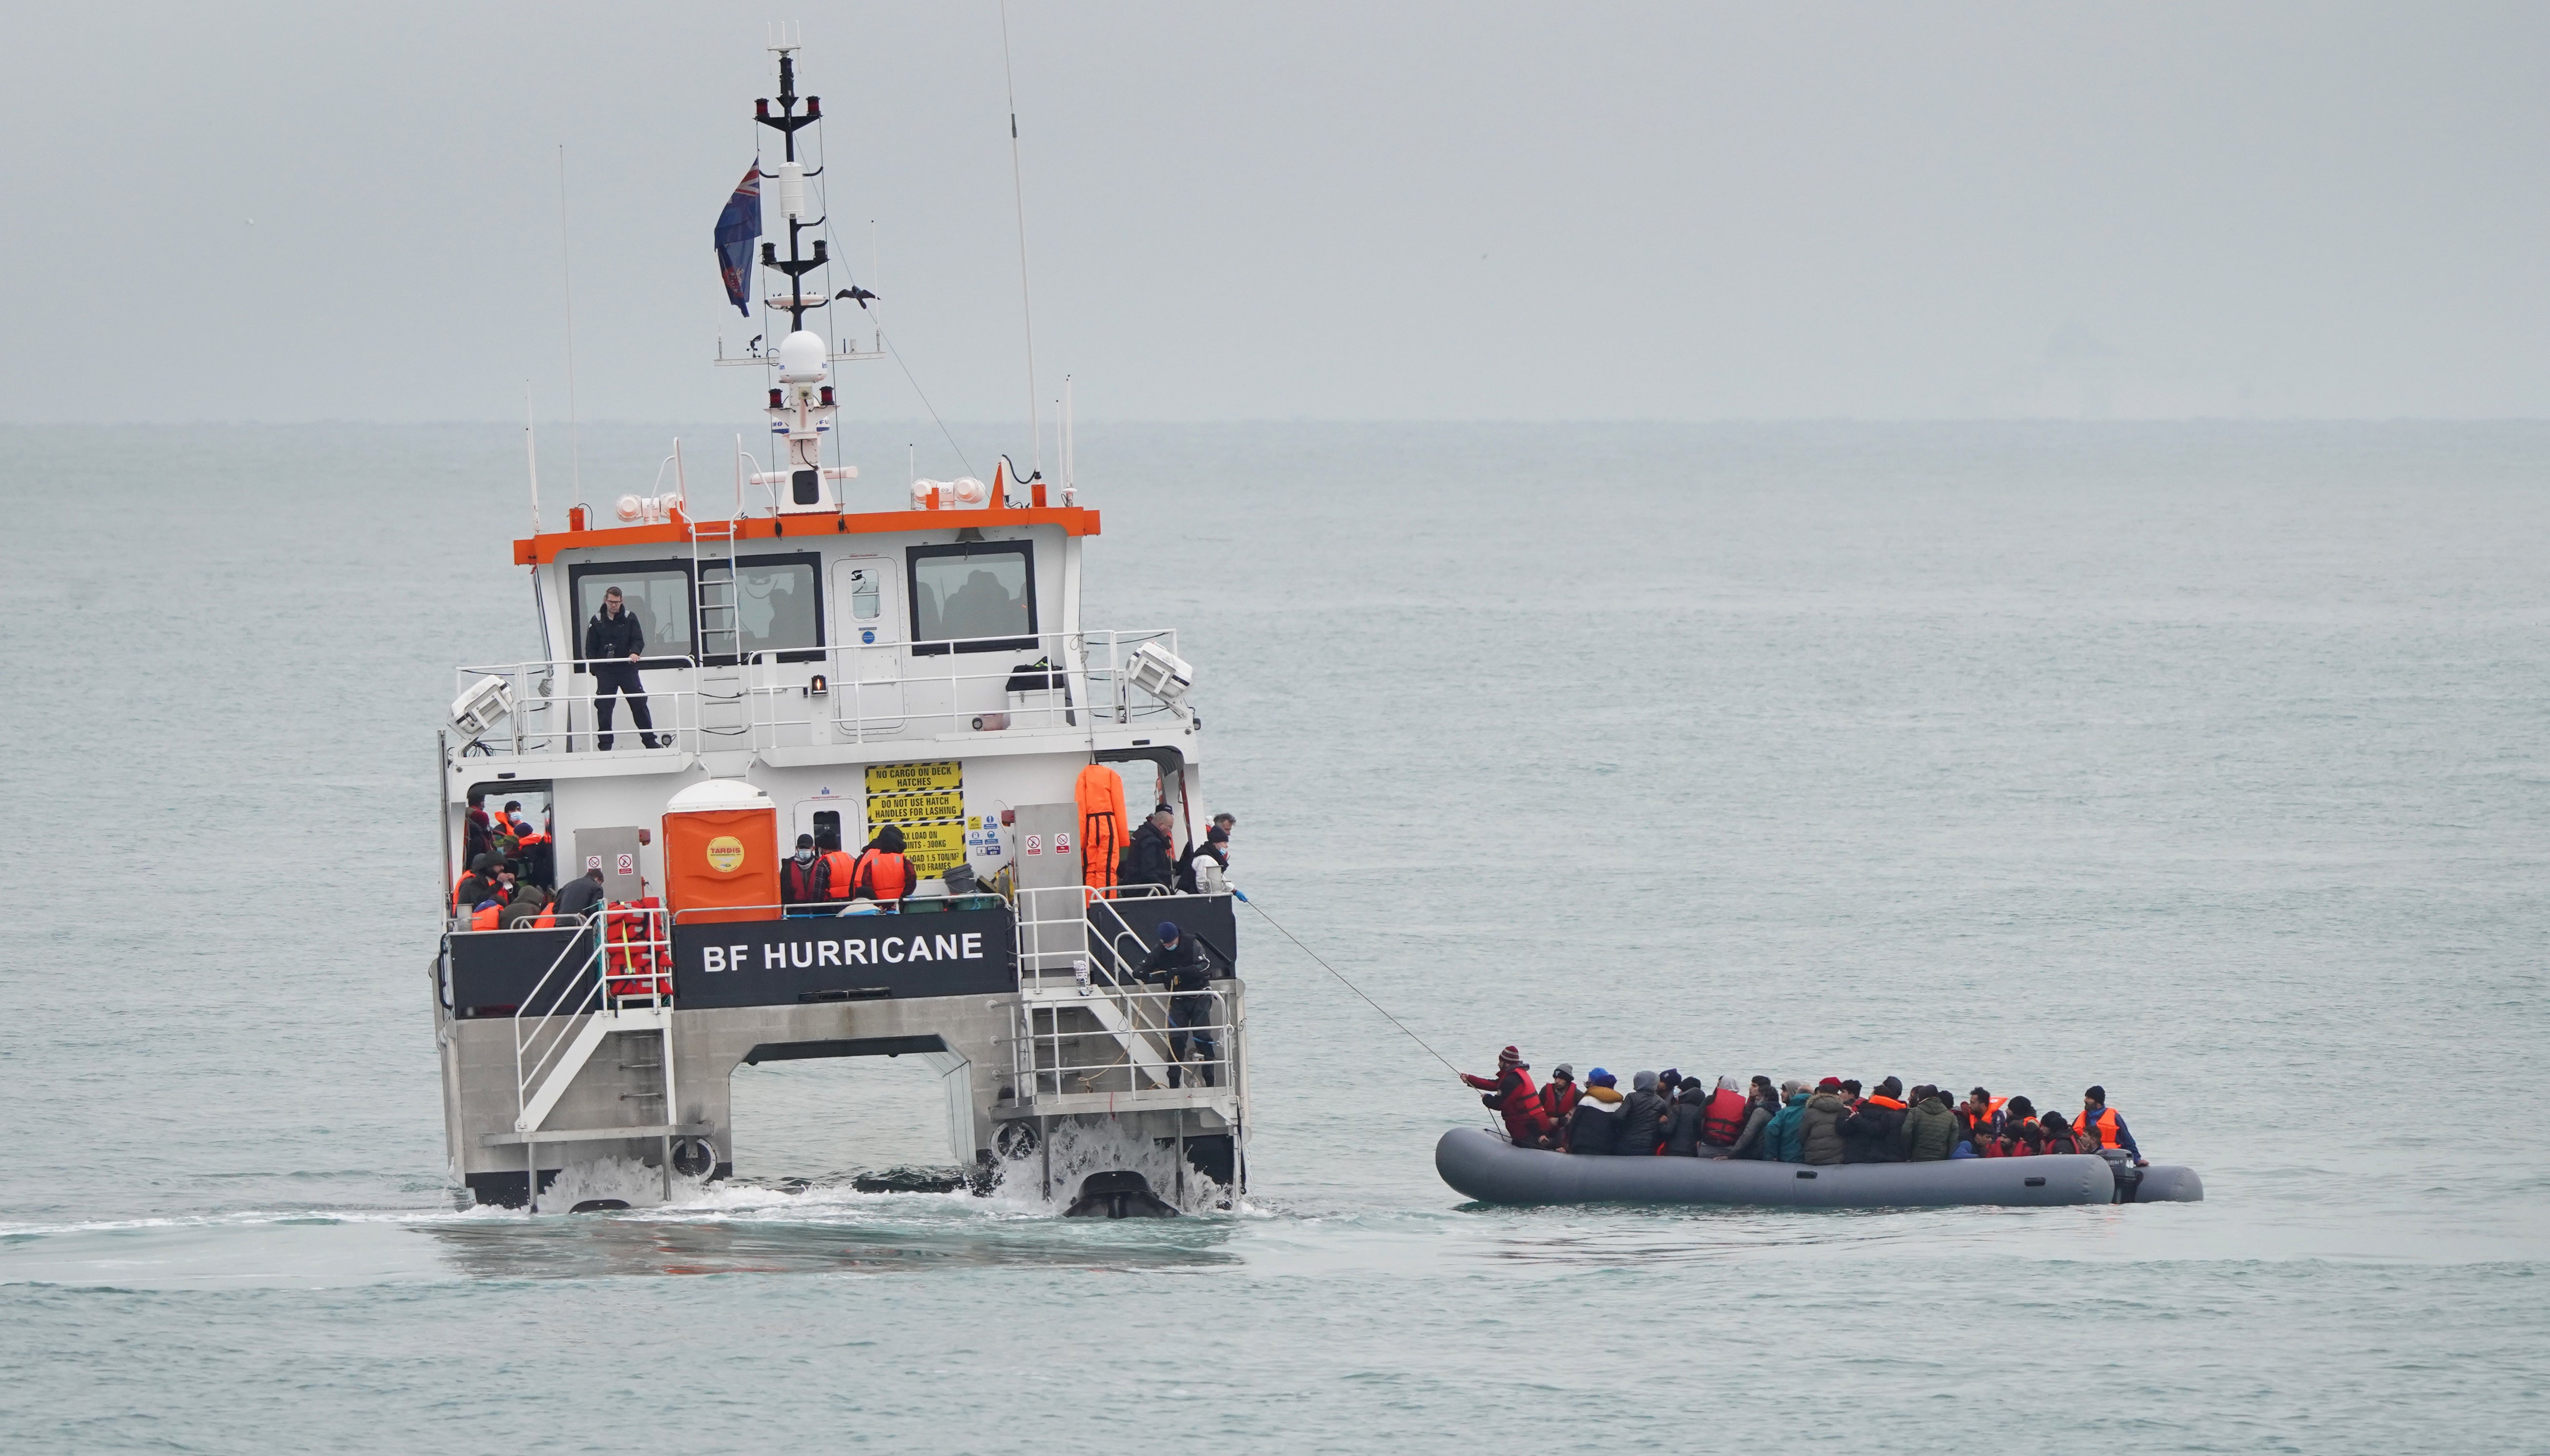 More than 20,000 people have been detected crossing the English Channel in small boats so far this year, Government figures show (Gareth Fuller/PA)